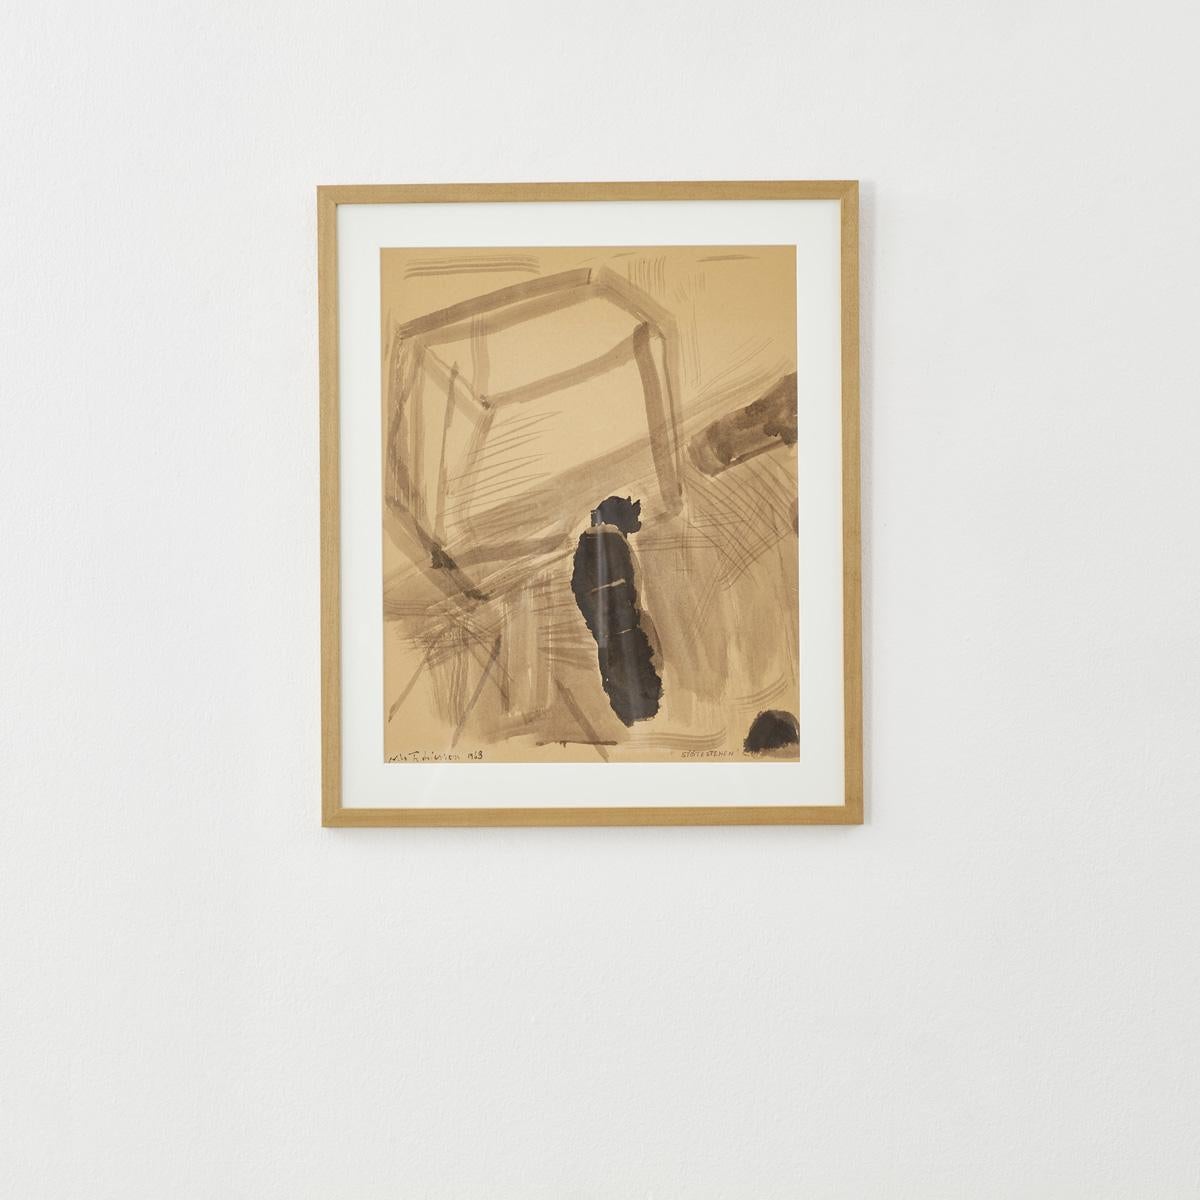 A framed ink drawing by unknown artist, signed “Stöteestenen 1963”. An abstracted figure sits in the foreground surrounded by marks and shapes setting the scene.